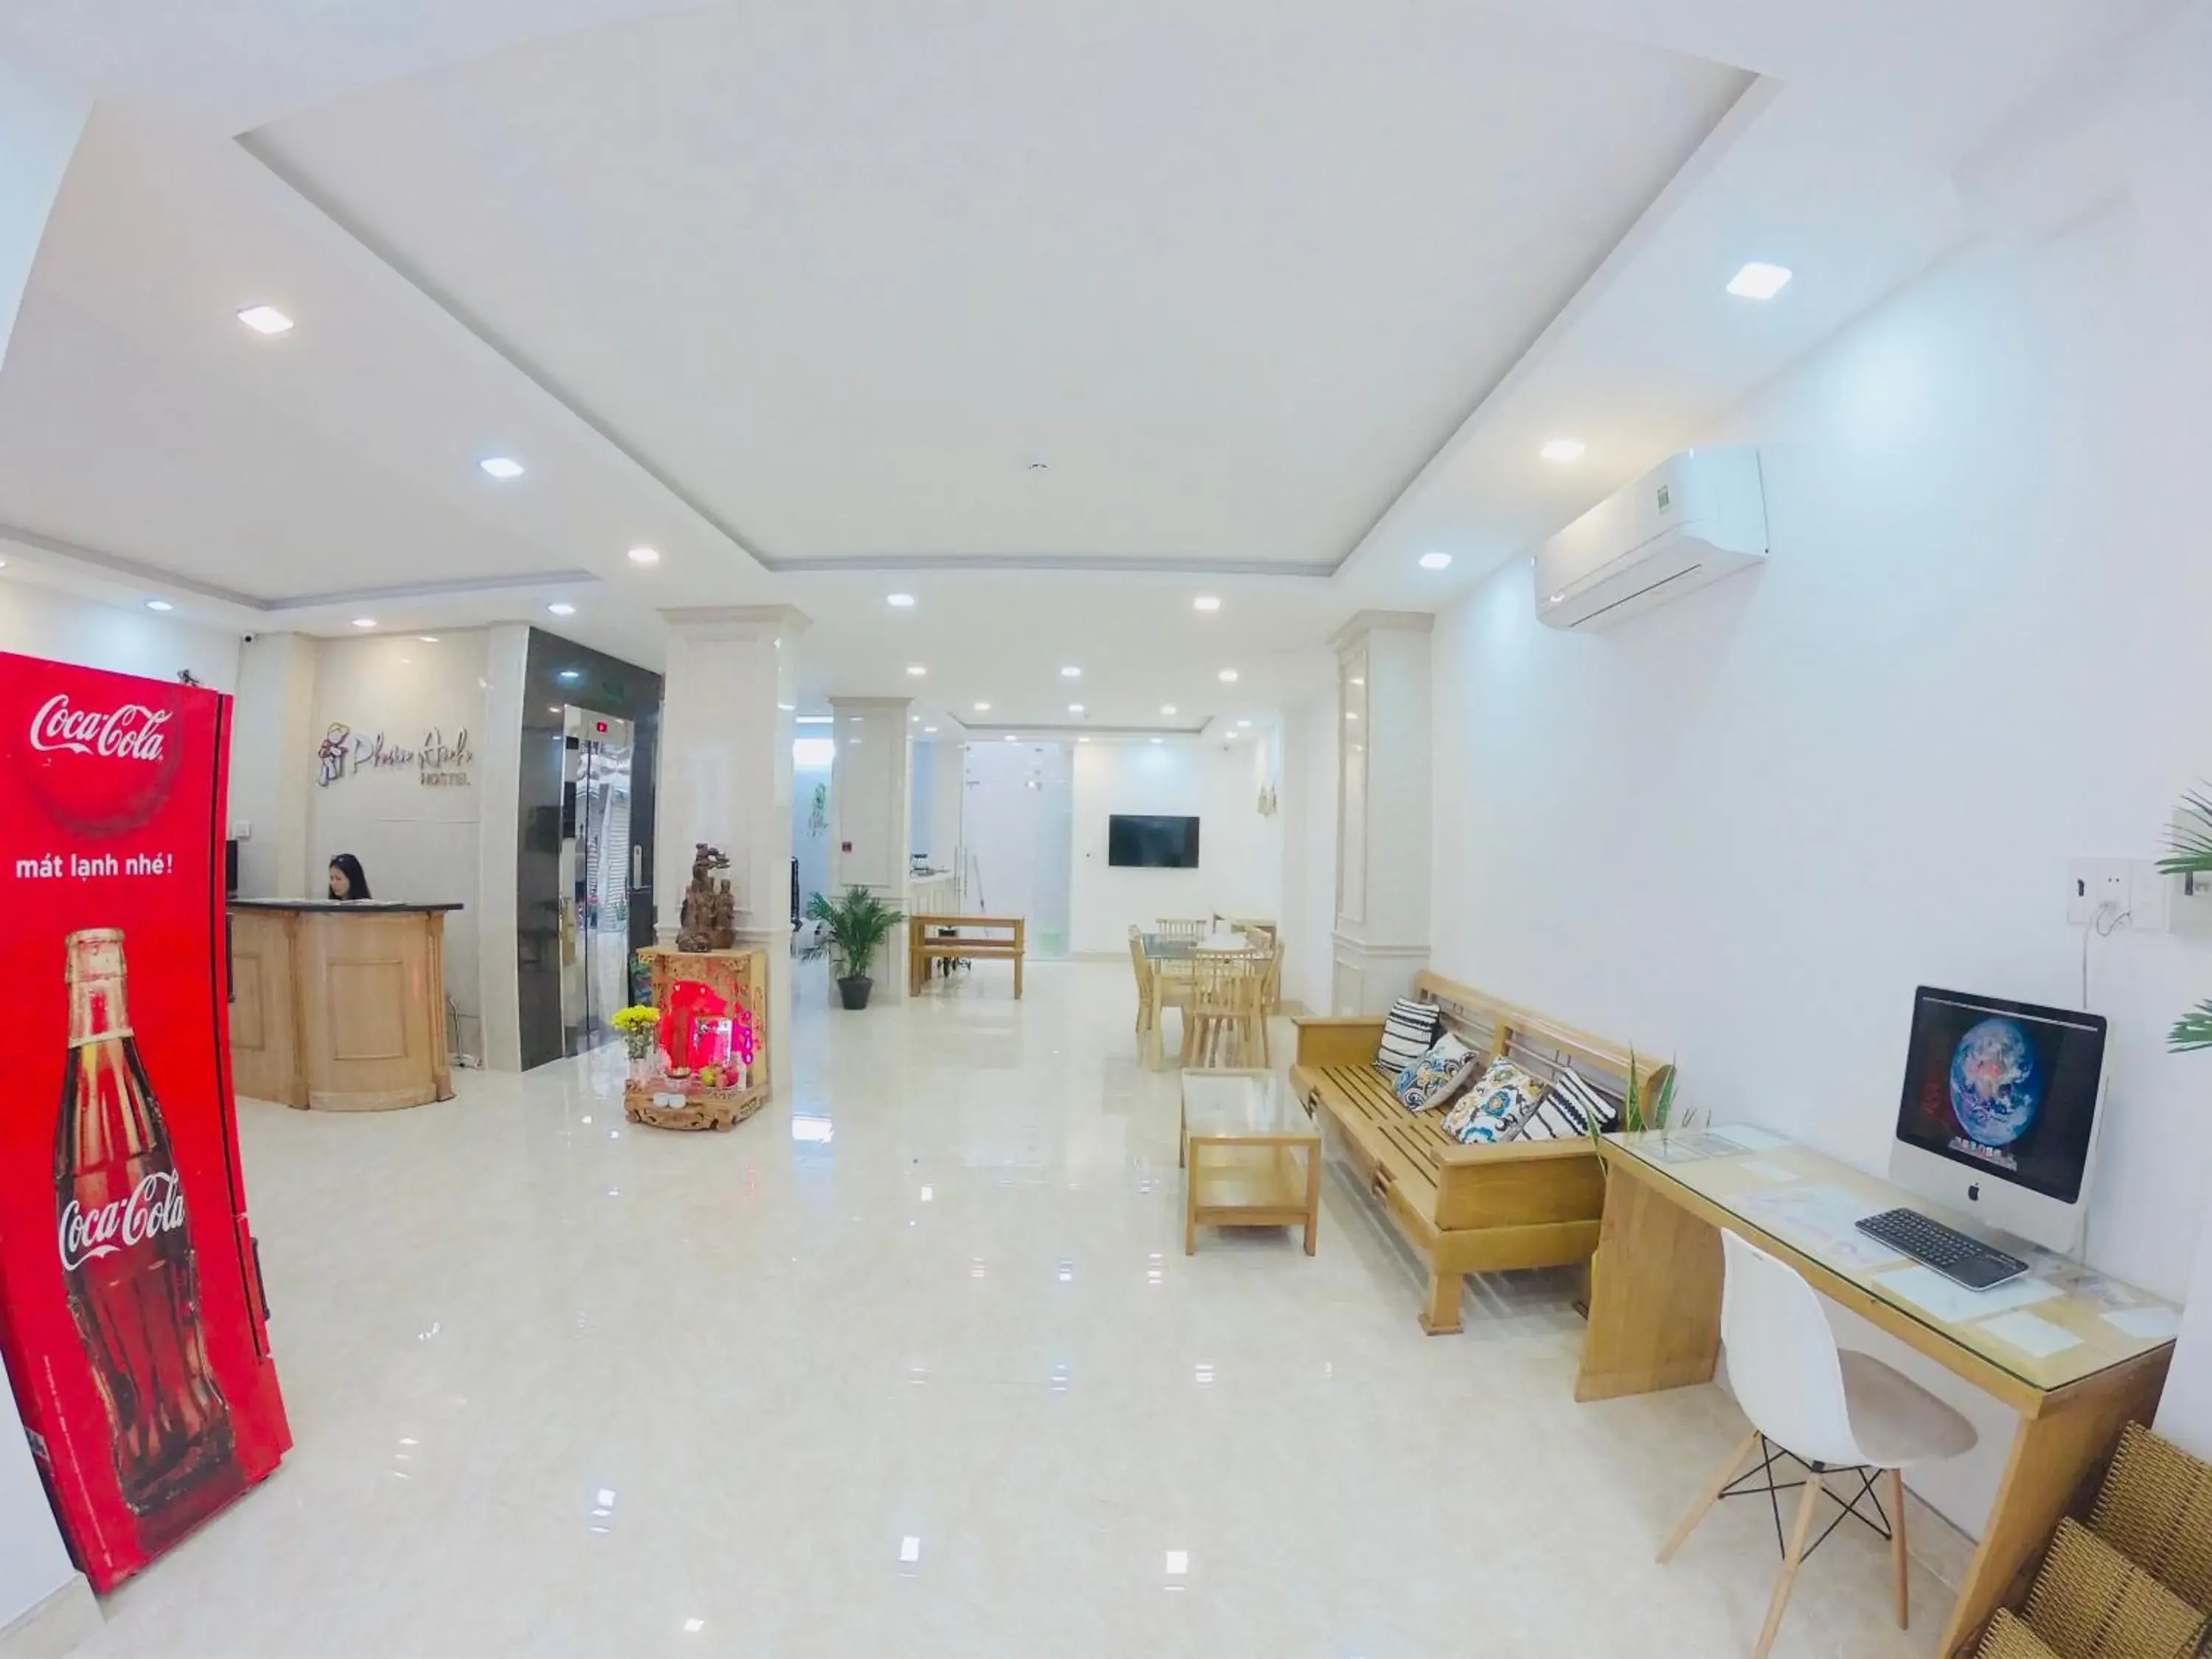 Property building in Phan Anh Hotel